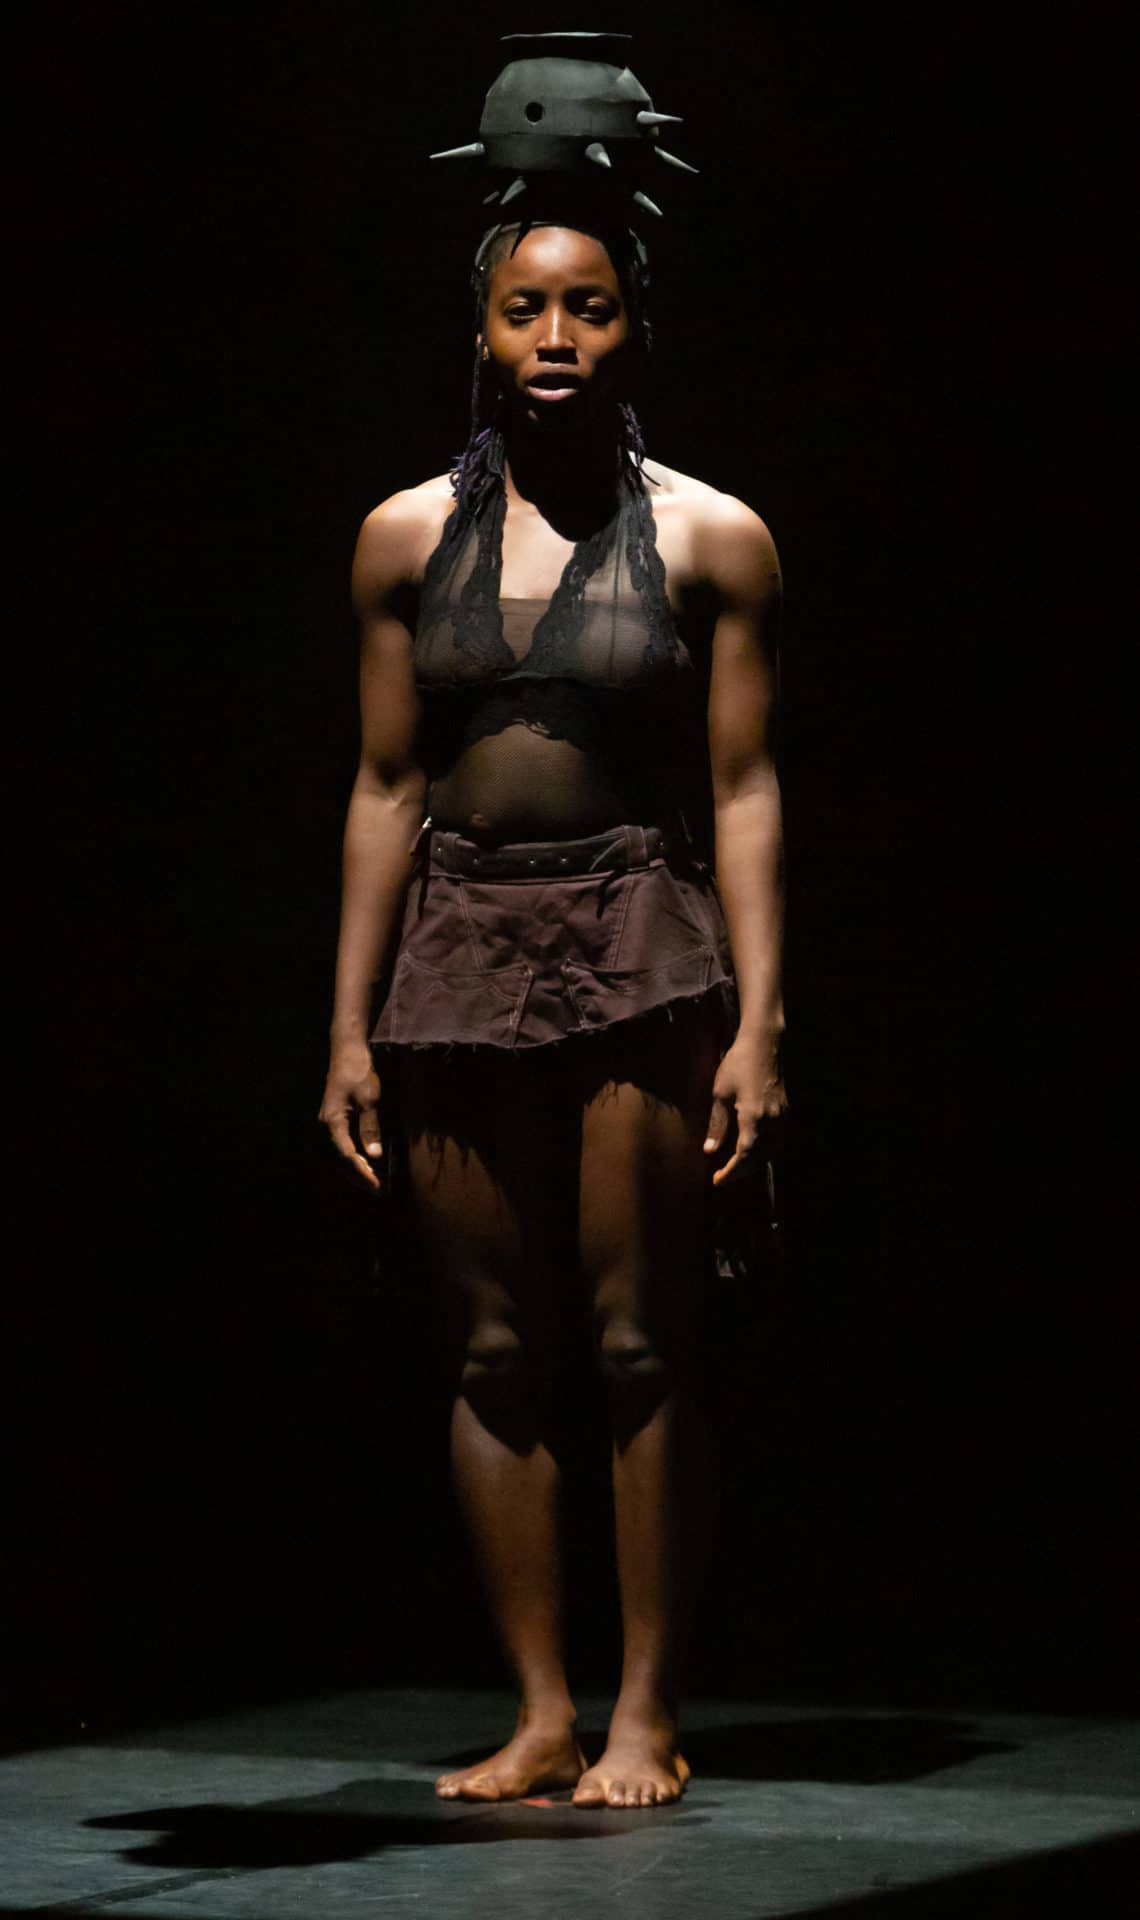 A performer in QDance Company stands tall, balancing a spiked iron cauldron on her head, in the light on a darkened stage at the Centre Pompidou in Paris, France. Press image courtesy of PS21